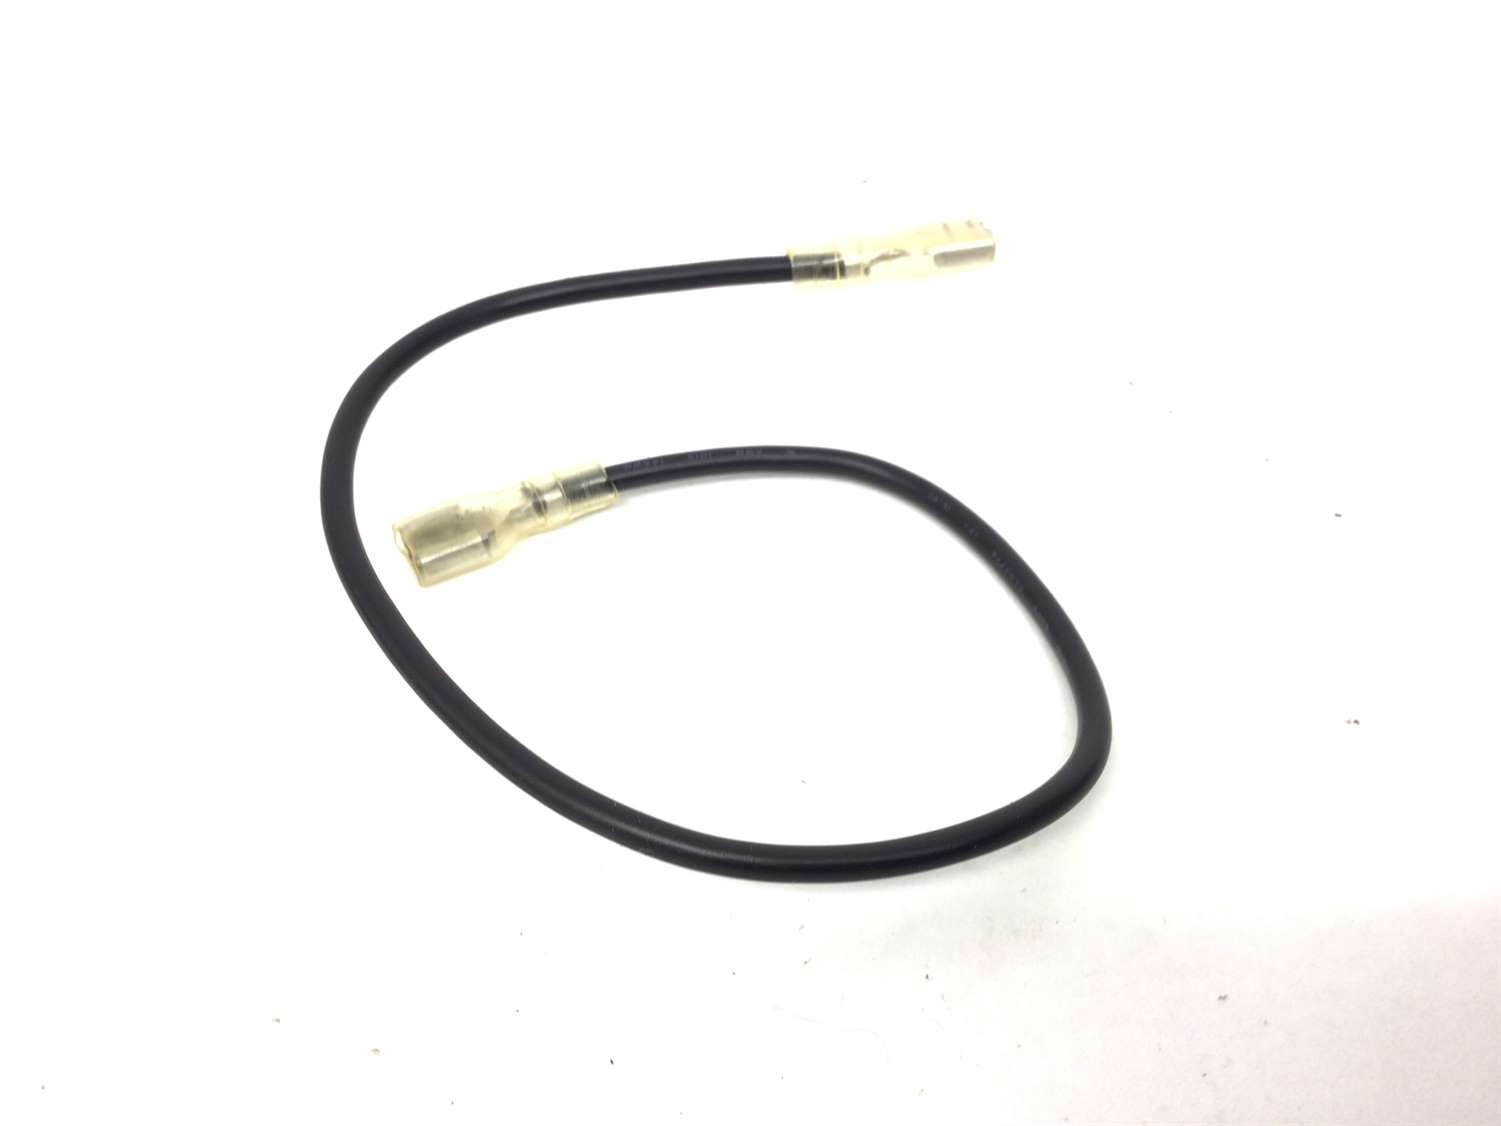 Connecting Cable Long Black (Used)